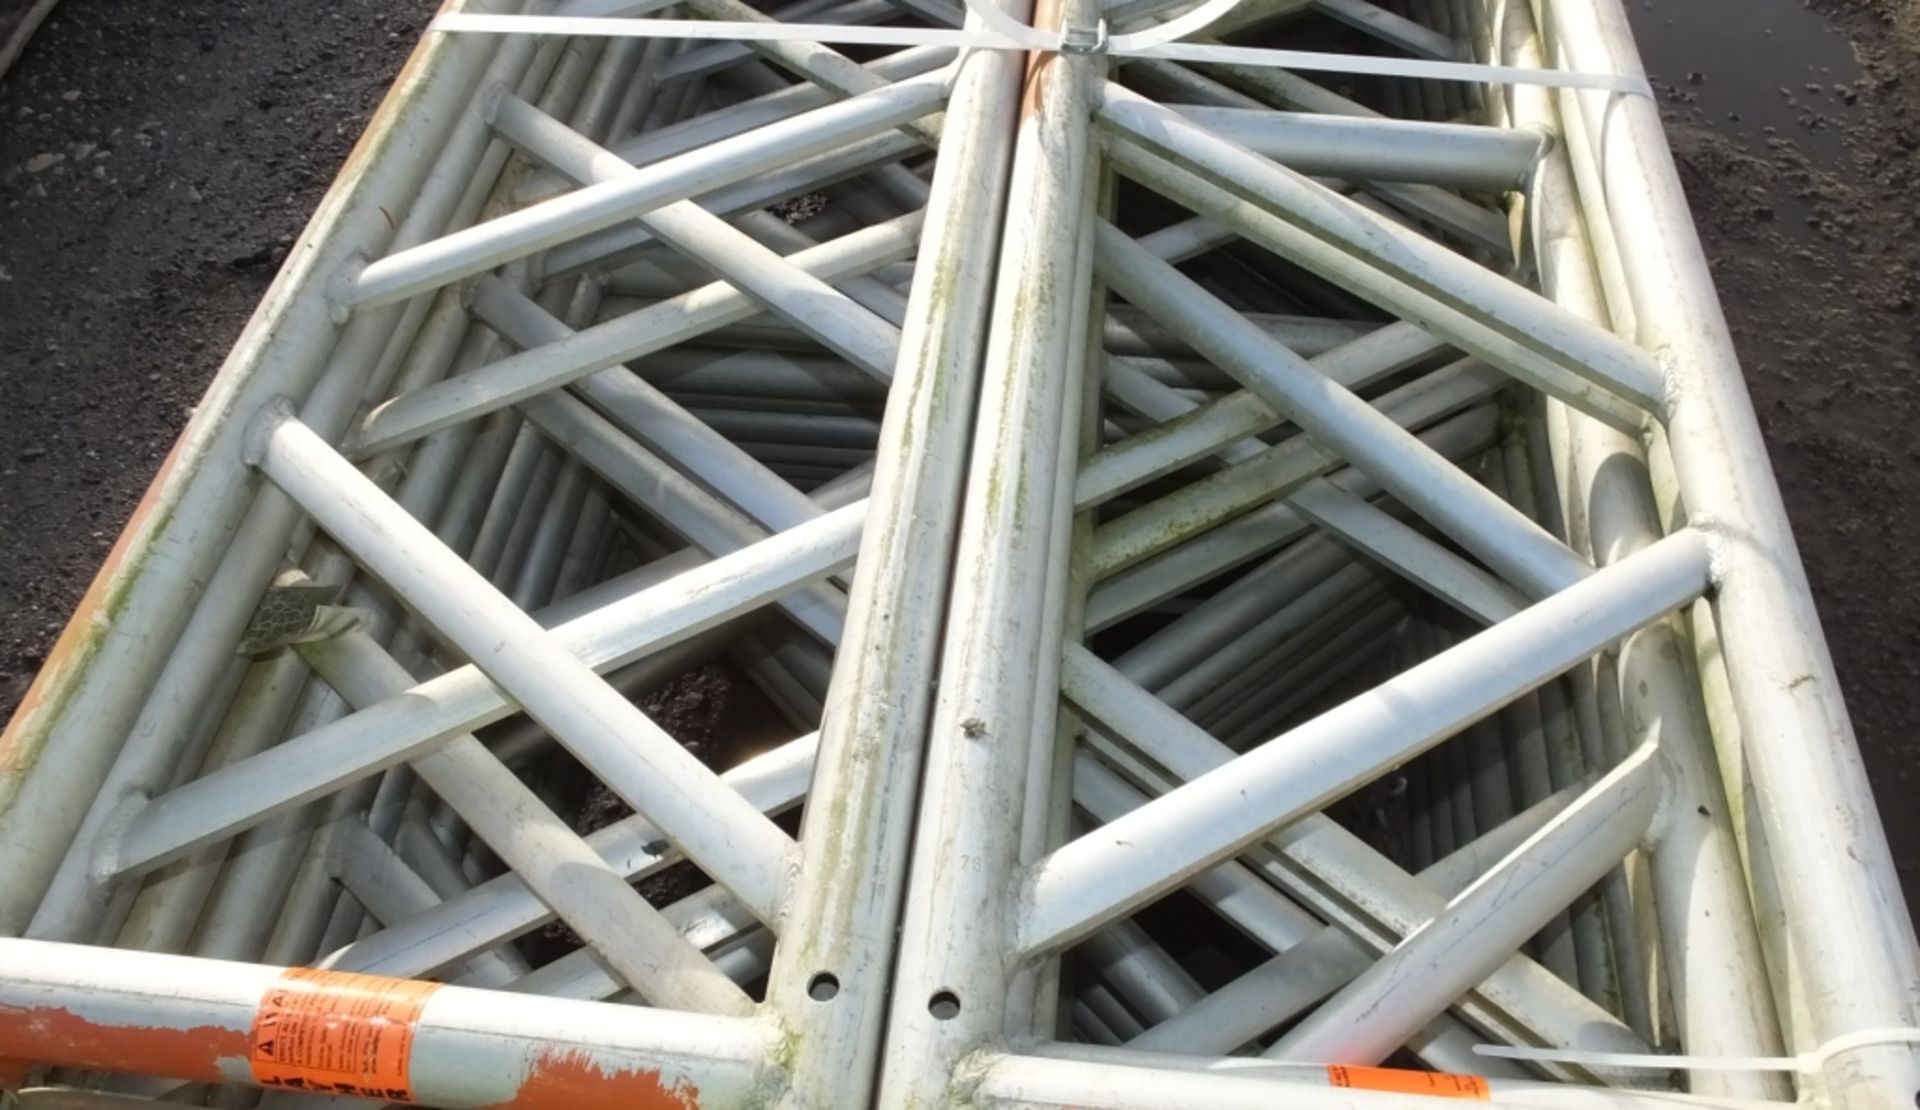 28x 4M Layher Ladder Beams - Staging Board sections - Unit Beam SS400 8.0M - Image 3 of 5